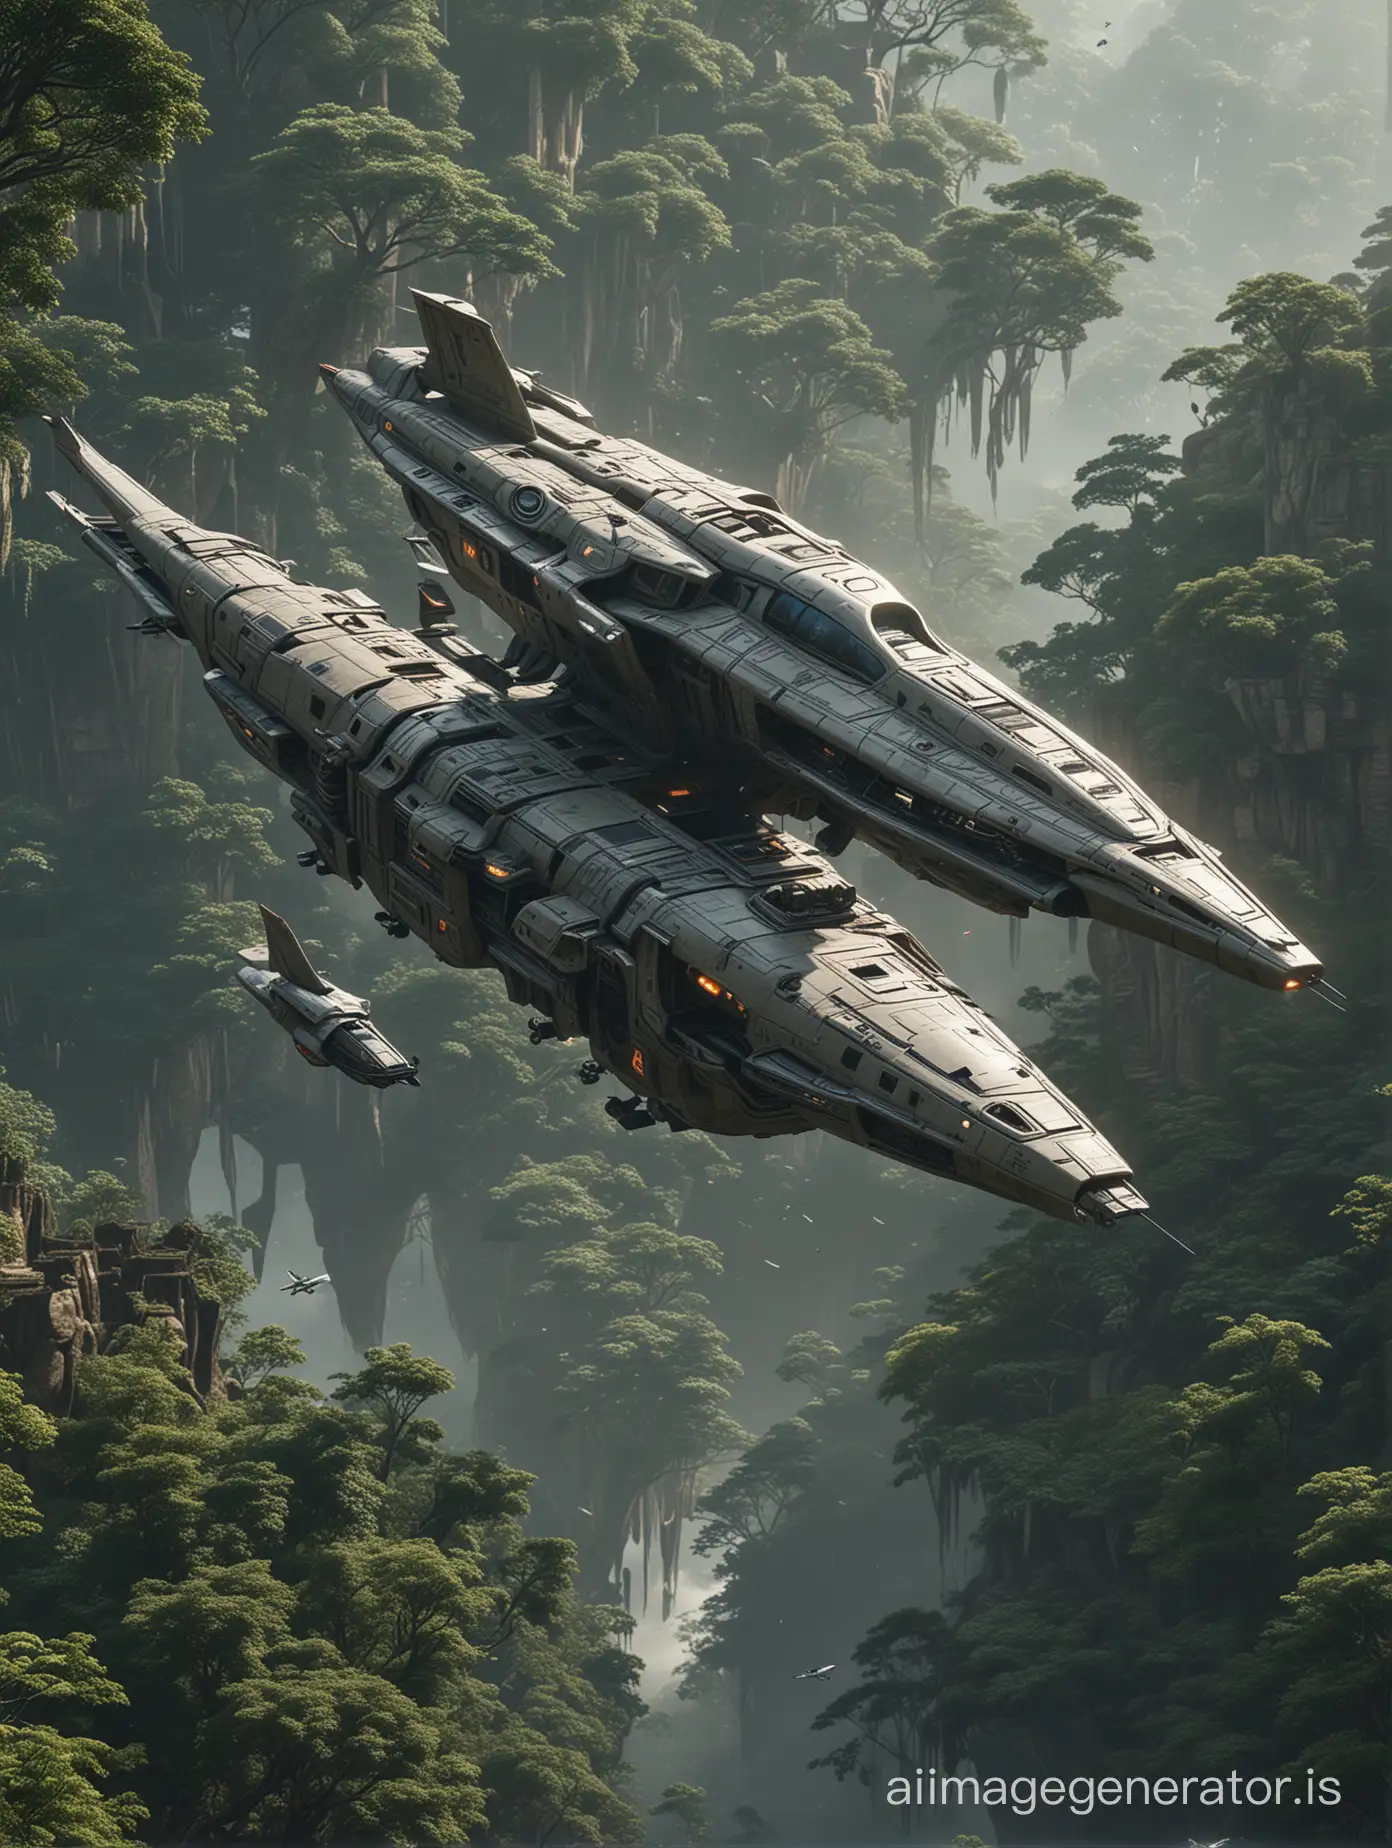 Multi-level disproportionate alien spacecraft flying contraption, time traveling to Ancient Majapahit townscape, with a forest background, in the style of sci-fi, Unreal Engine, octane render, with several temples and goddess statues with wings around the scenery, and surprised Majapahit citizens, transformed into a Supersonic vtol plane.